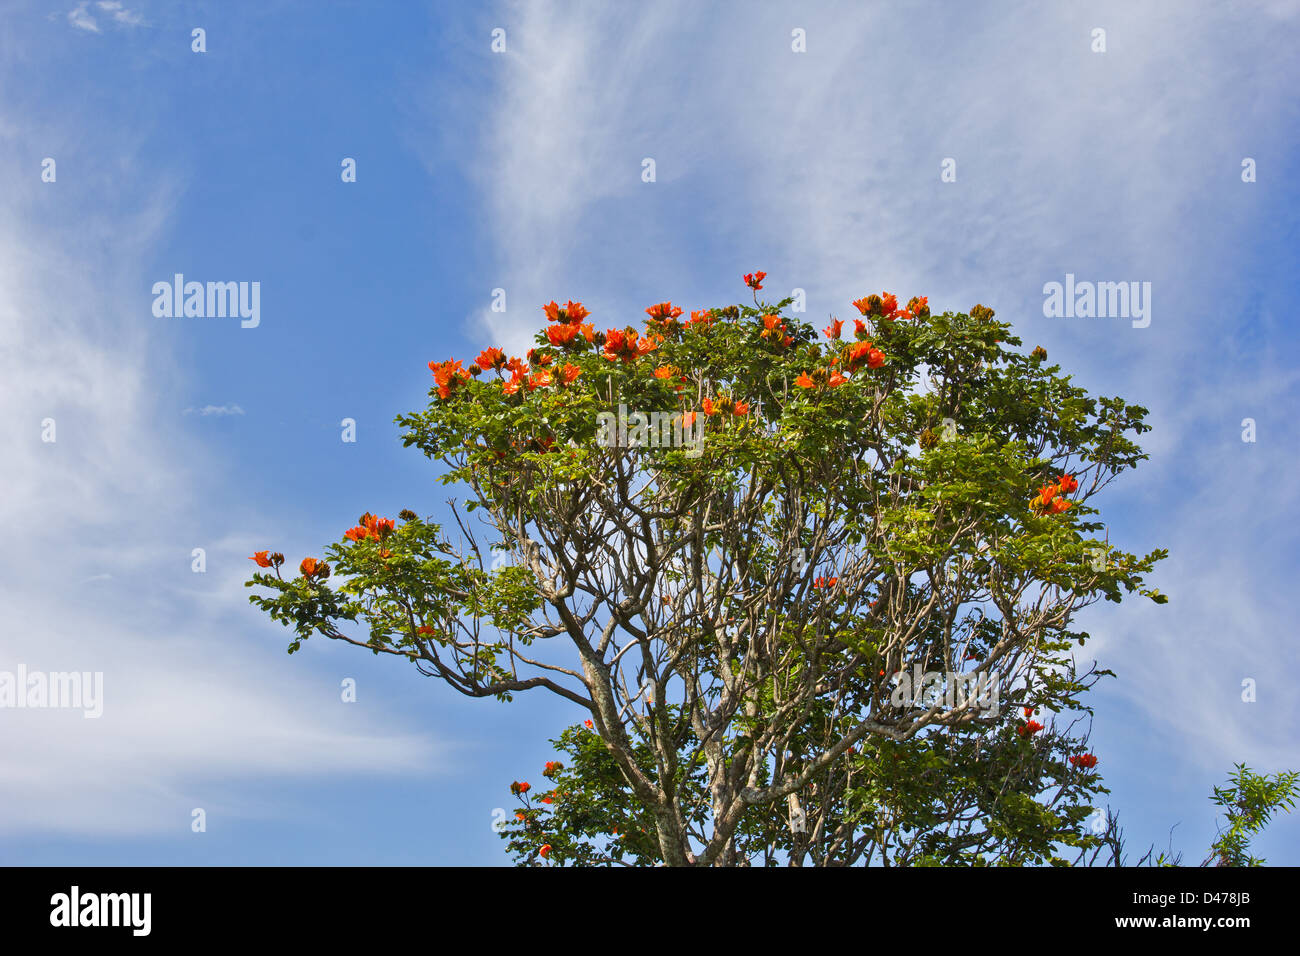 AFRICAN TULIP TREE [Spathodea ]  IN FLOWER AGAINST A BLUE SKY AND FINE WHITE CLOUDS Stock Photo